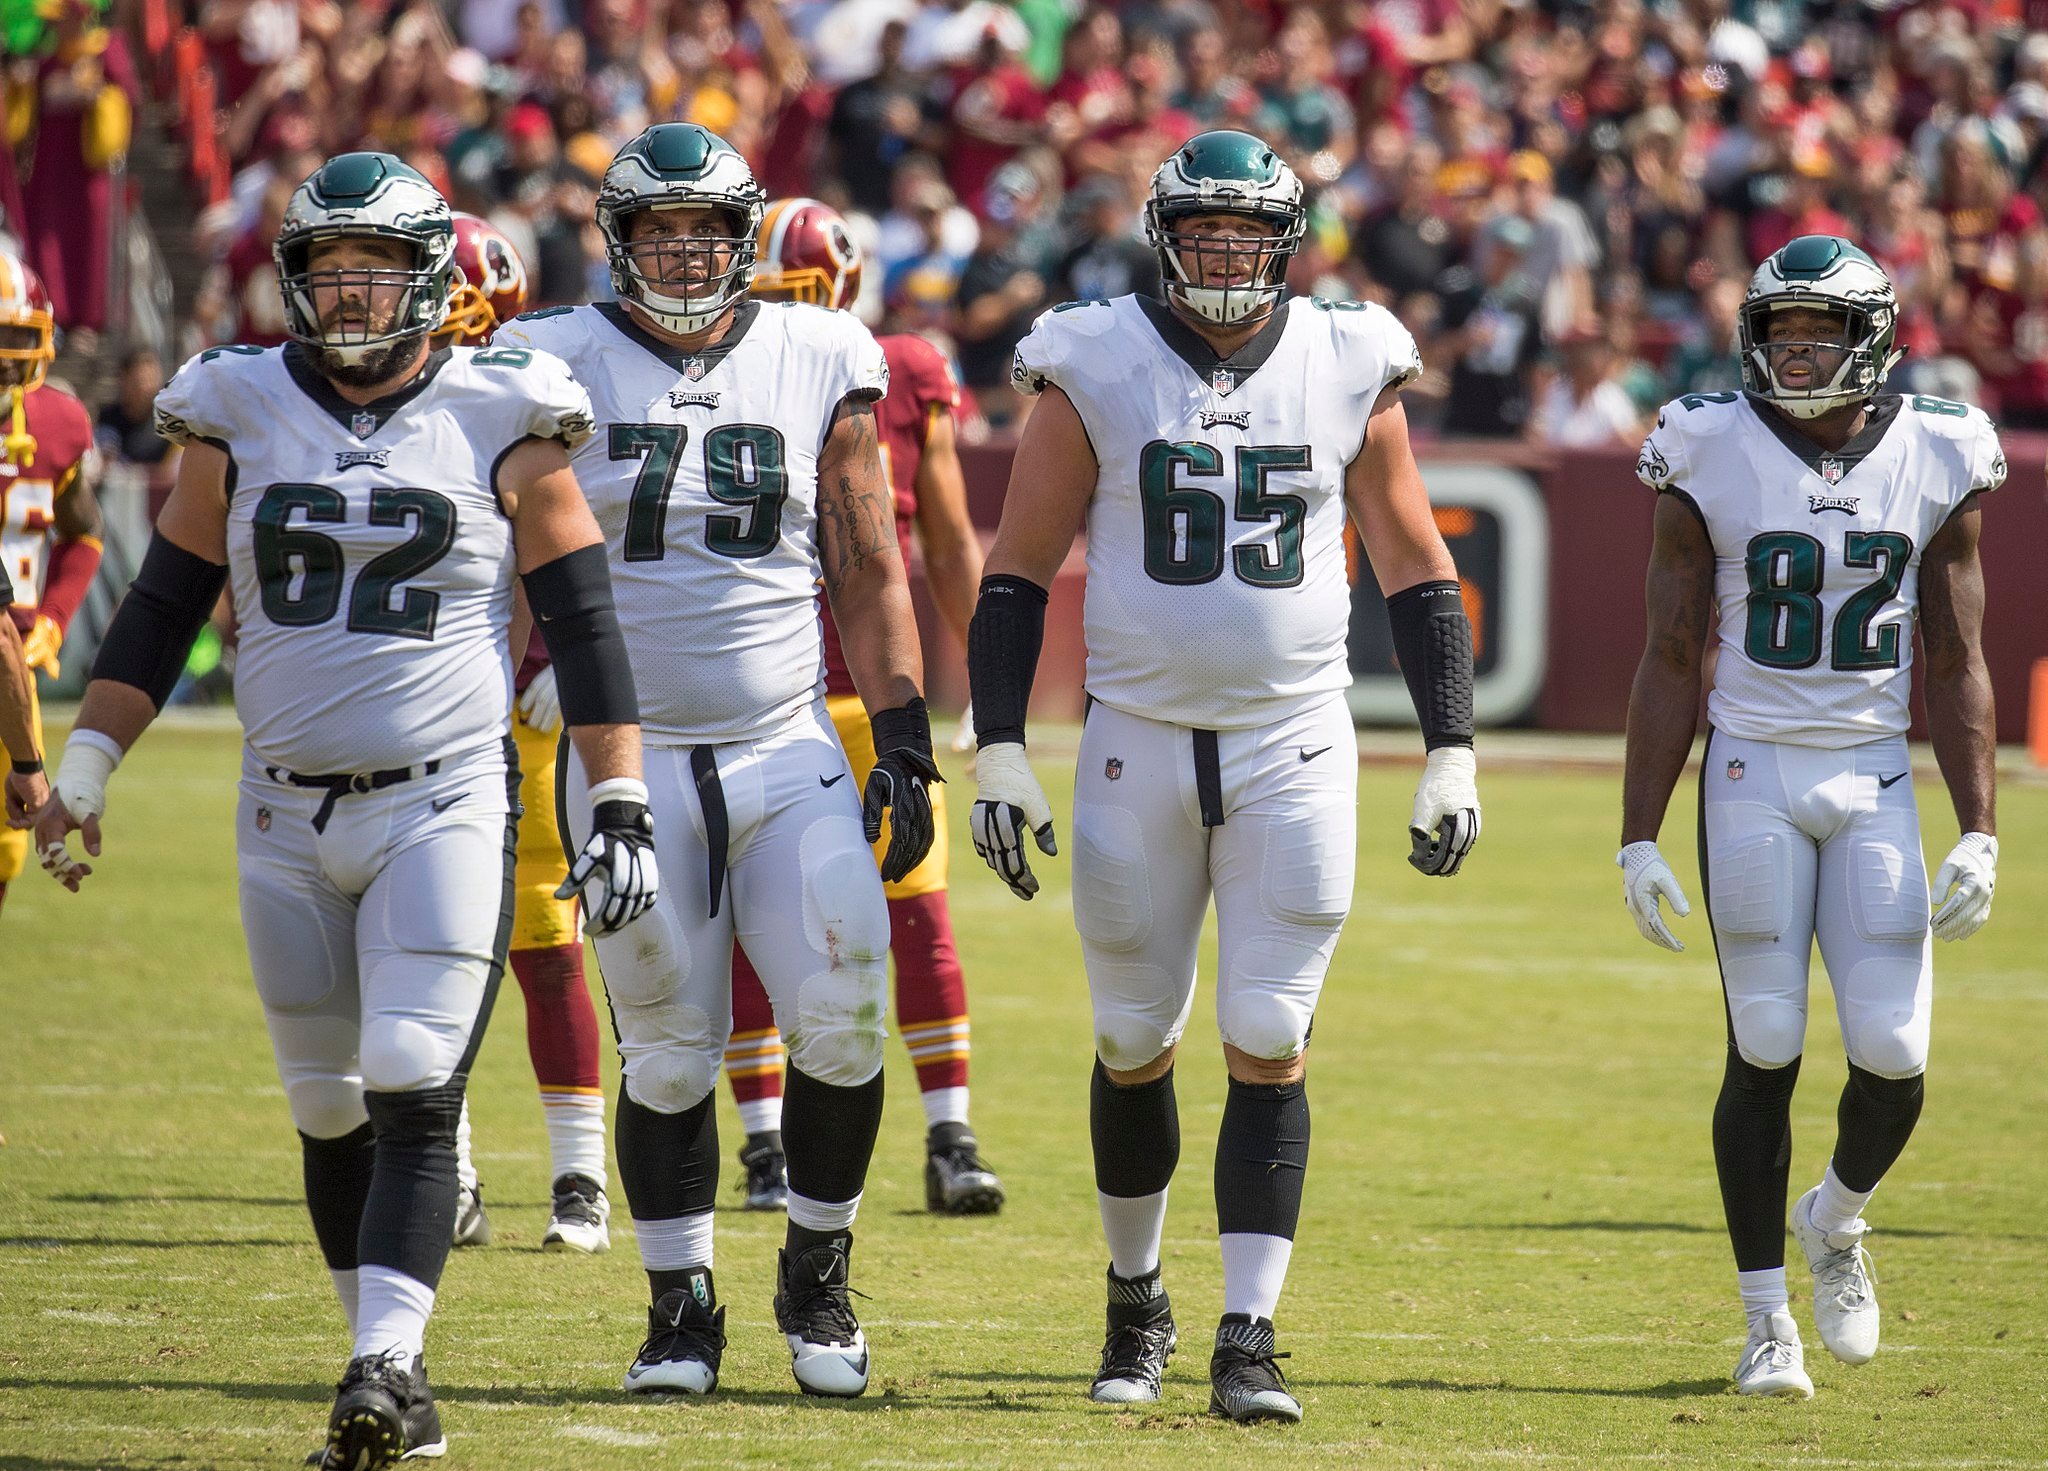 Eagles players, Sept. 2017, Photo: Keith Allison from Hanover, MD, USA (Philadelphia Eagles) [CC BY-SA 2.0 (https://creativecommons.org/licenses/by-sa/2.0)], via Wikimedia Commons